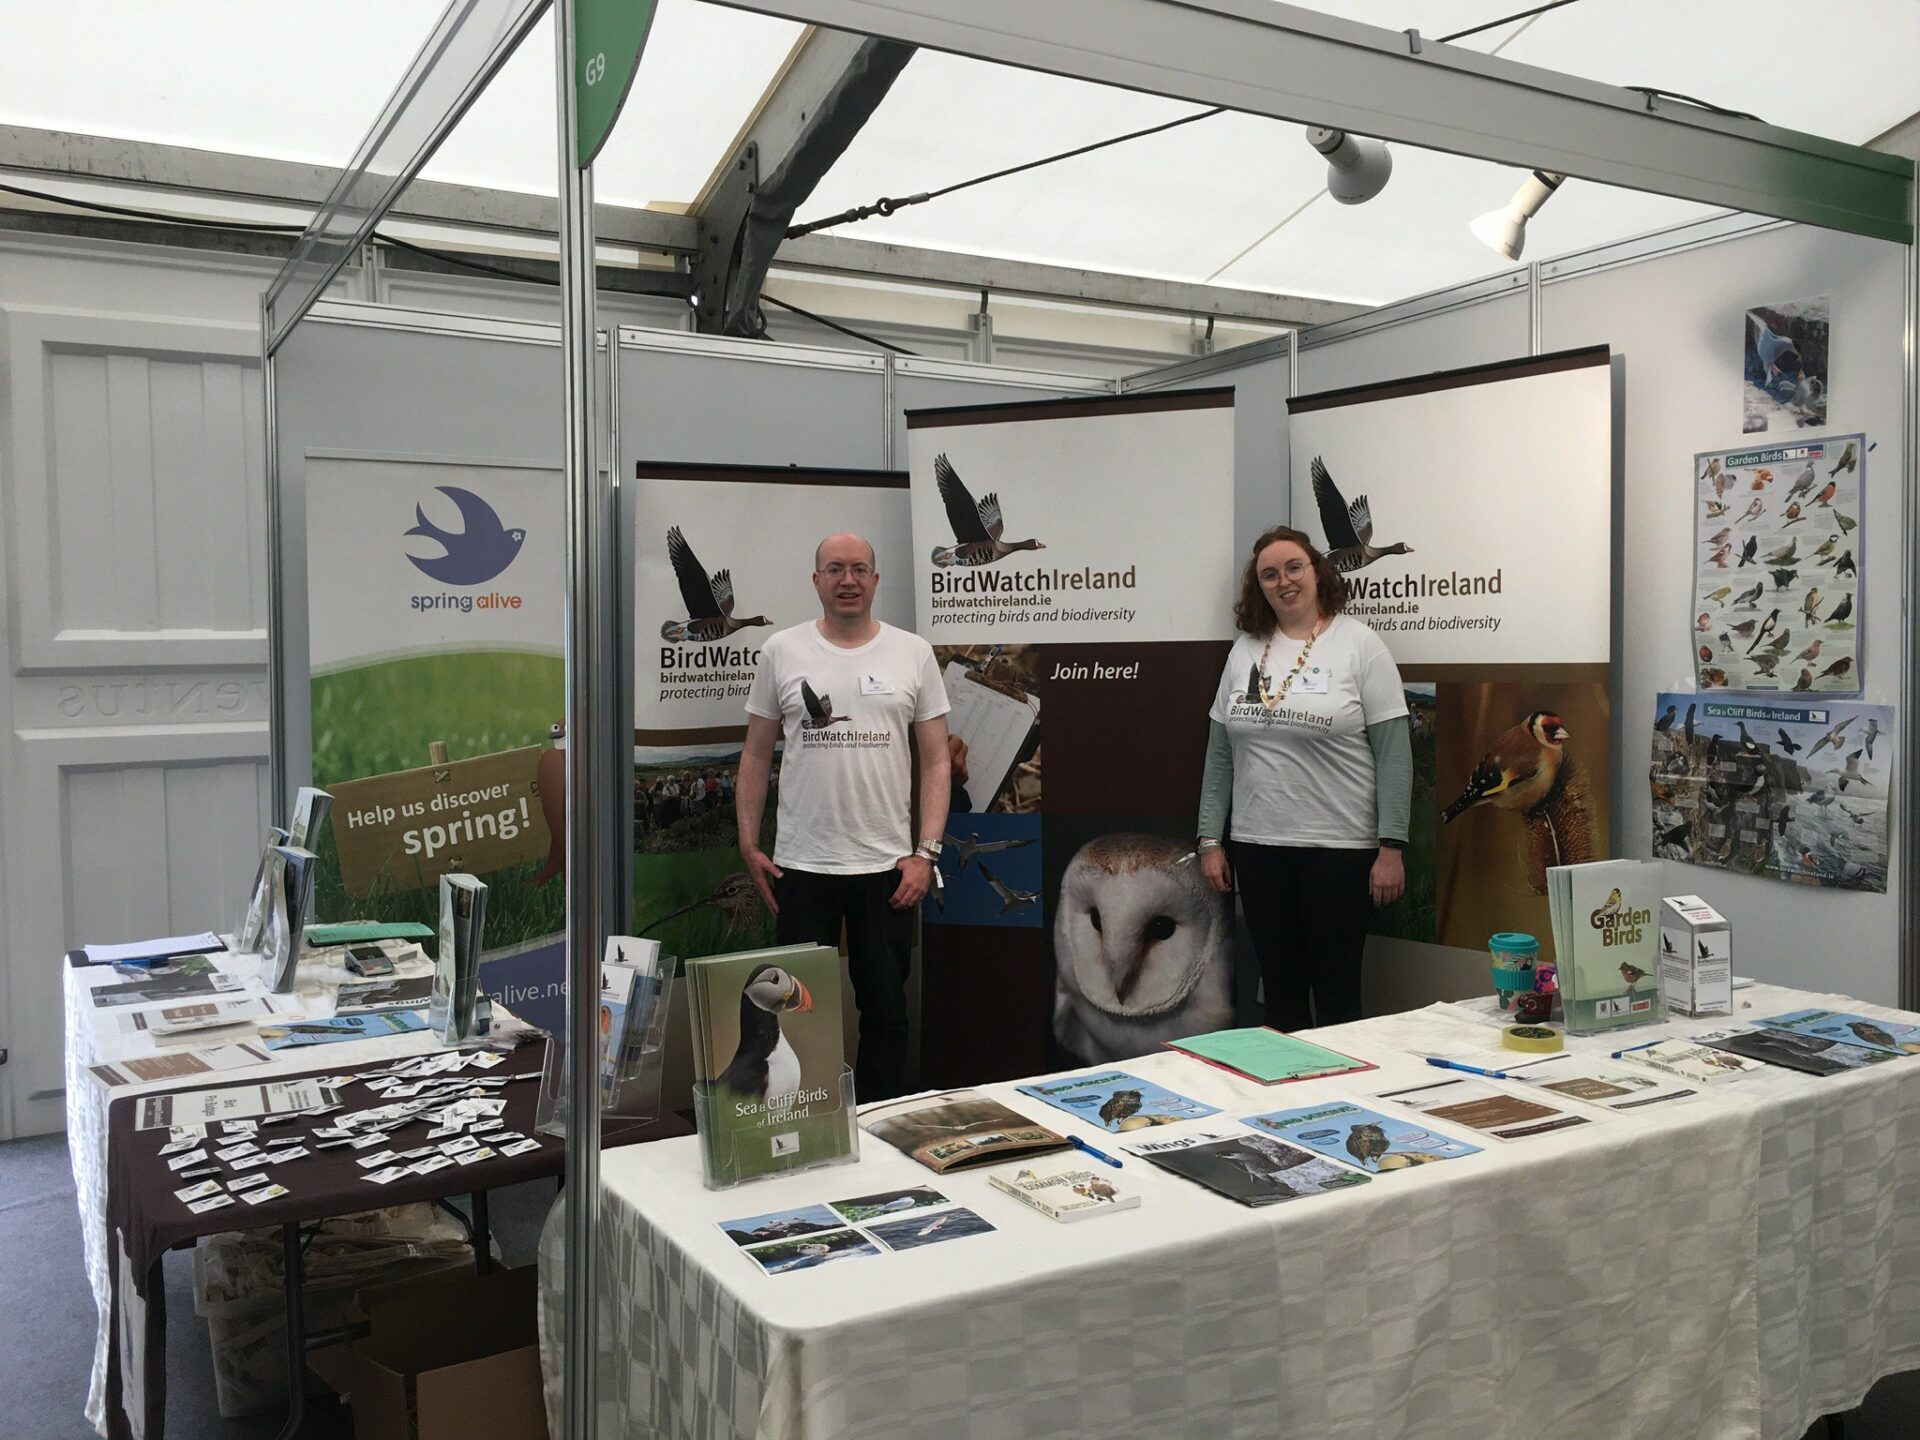 A man and a woman behind a stand for BirdWatch Ireland. At Bord Bia's Bloom festival in Phoenix Park Dublin.